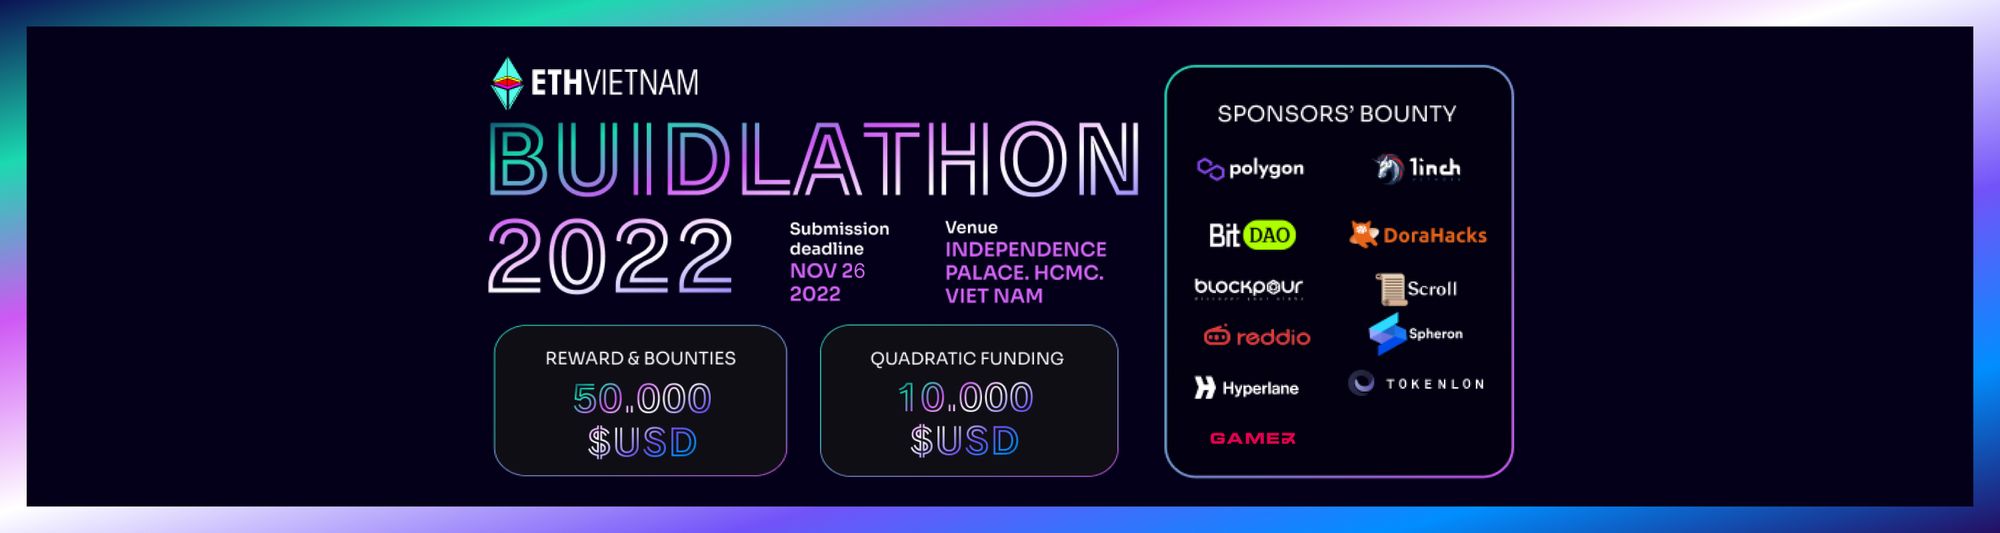 ETH VIETNAM BUIDLATHON 2022 Project Submission Guide